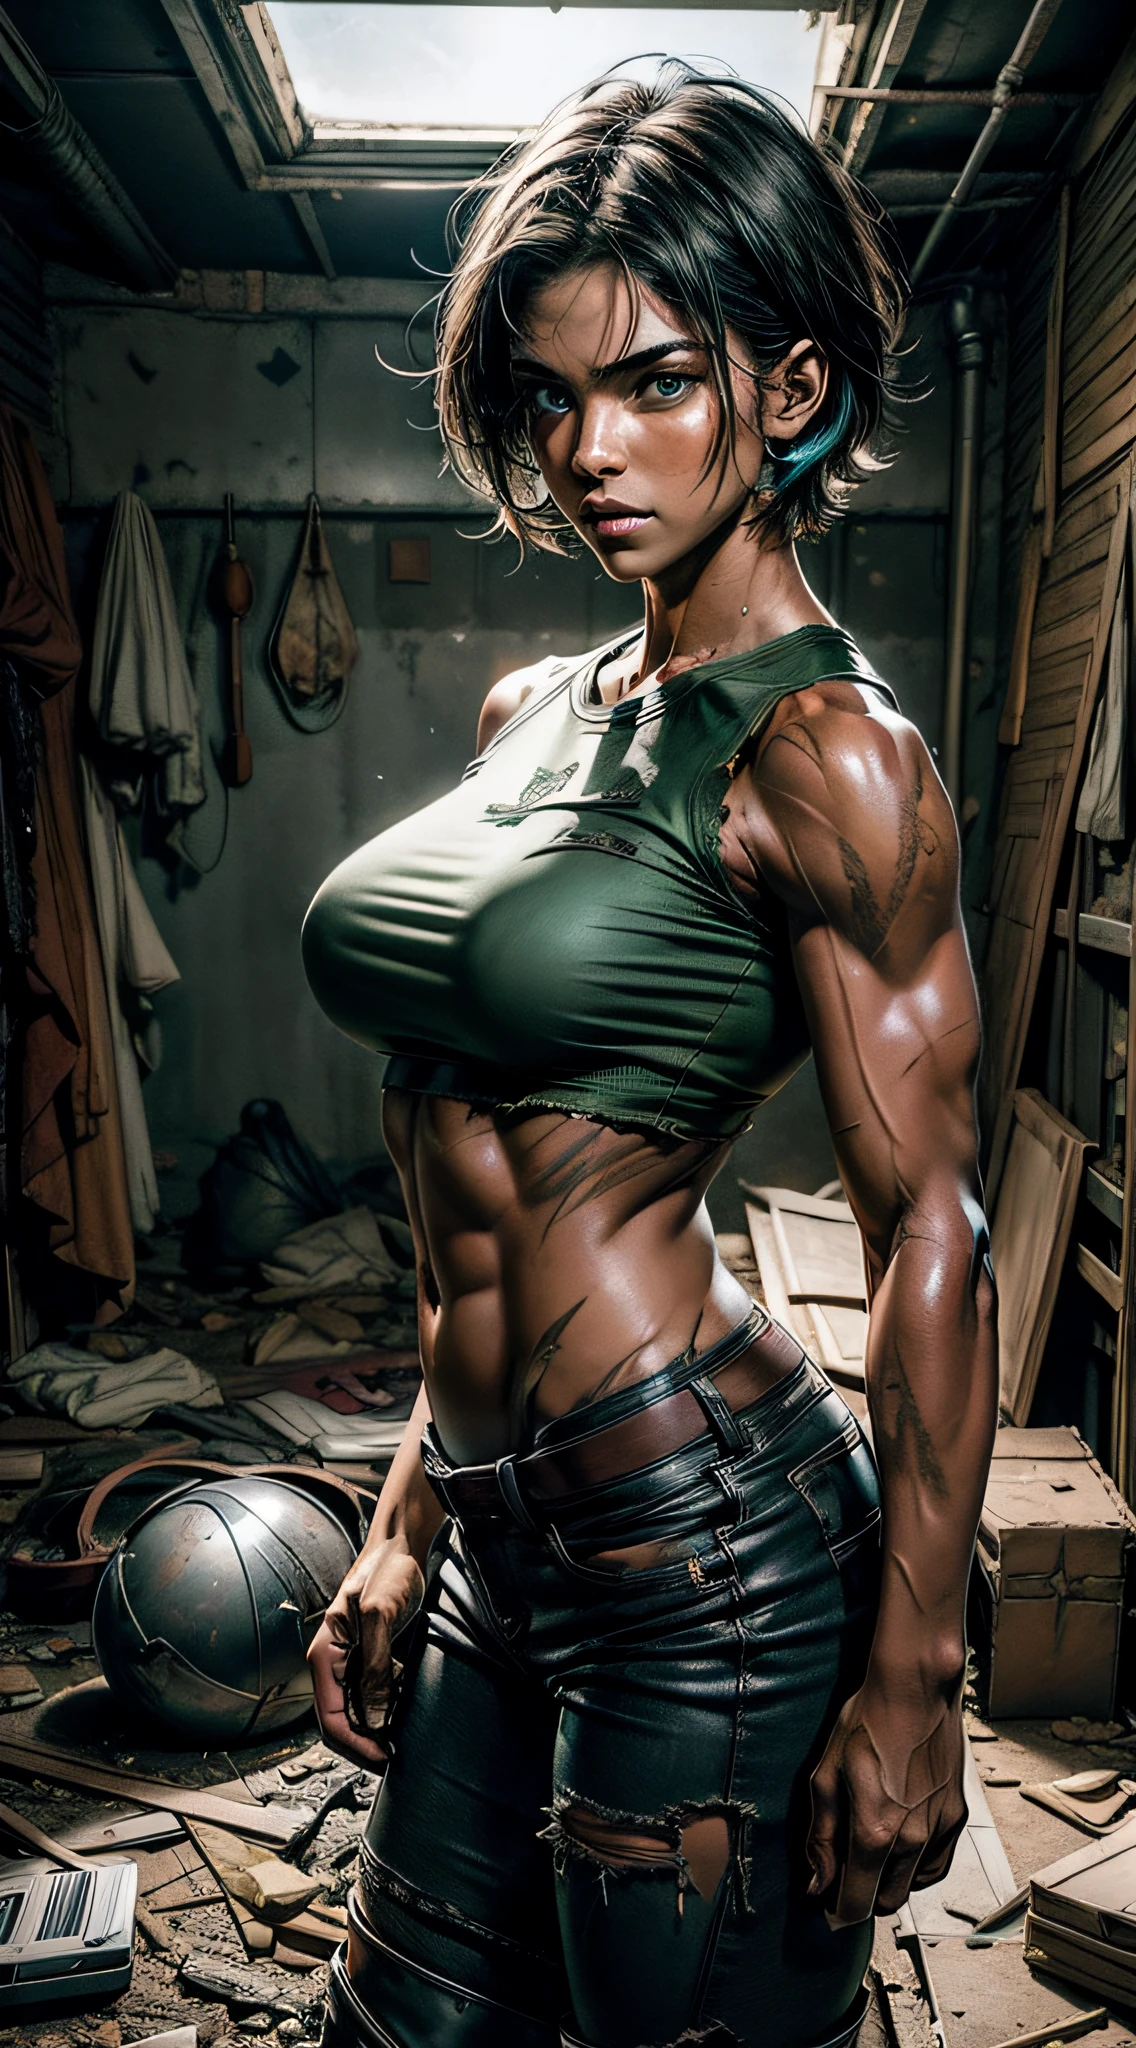 8k, realistic, vray, HDR, 1girl, extremely strong, well defined body, bodybuilder body, big breasts, small waist, dark skin tone, well detailed skin, skin texture, ((green eyes)), (short white hair) , body showing several scars, a lot of sweat, tight t-shirt, (some torn rags covering the body), tight micro shorts, boots, dynamic pose, in a large abandoned angar, apocalyptic image, serious expression, image as the basis of a survival character apocalyptic, environmental detail, dust.